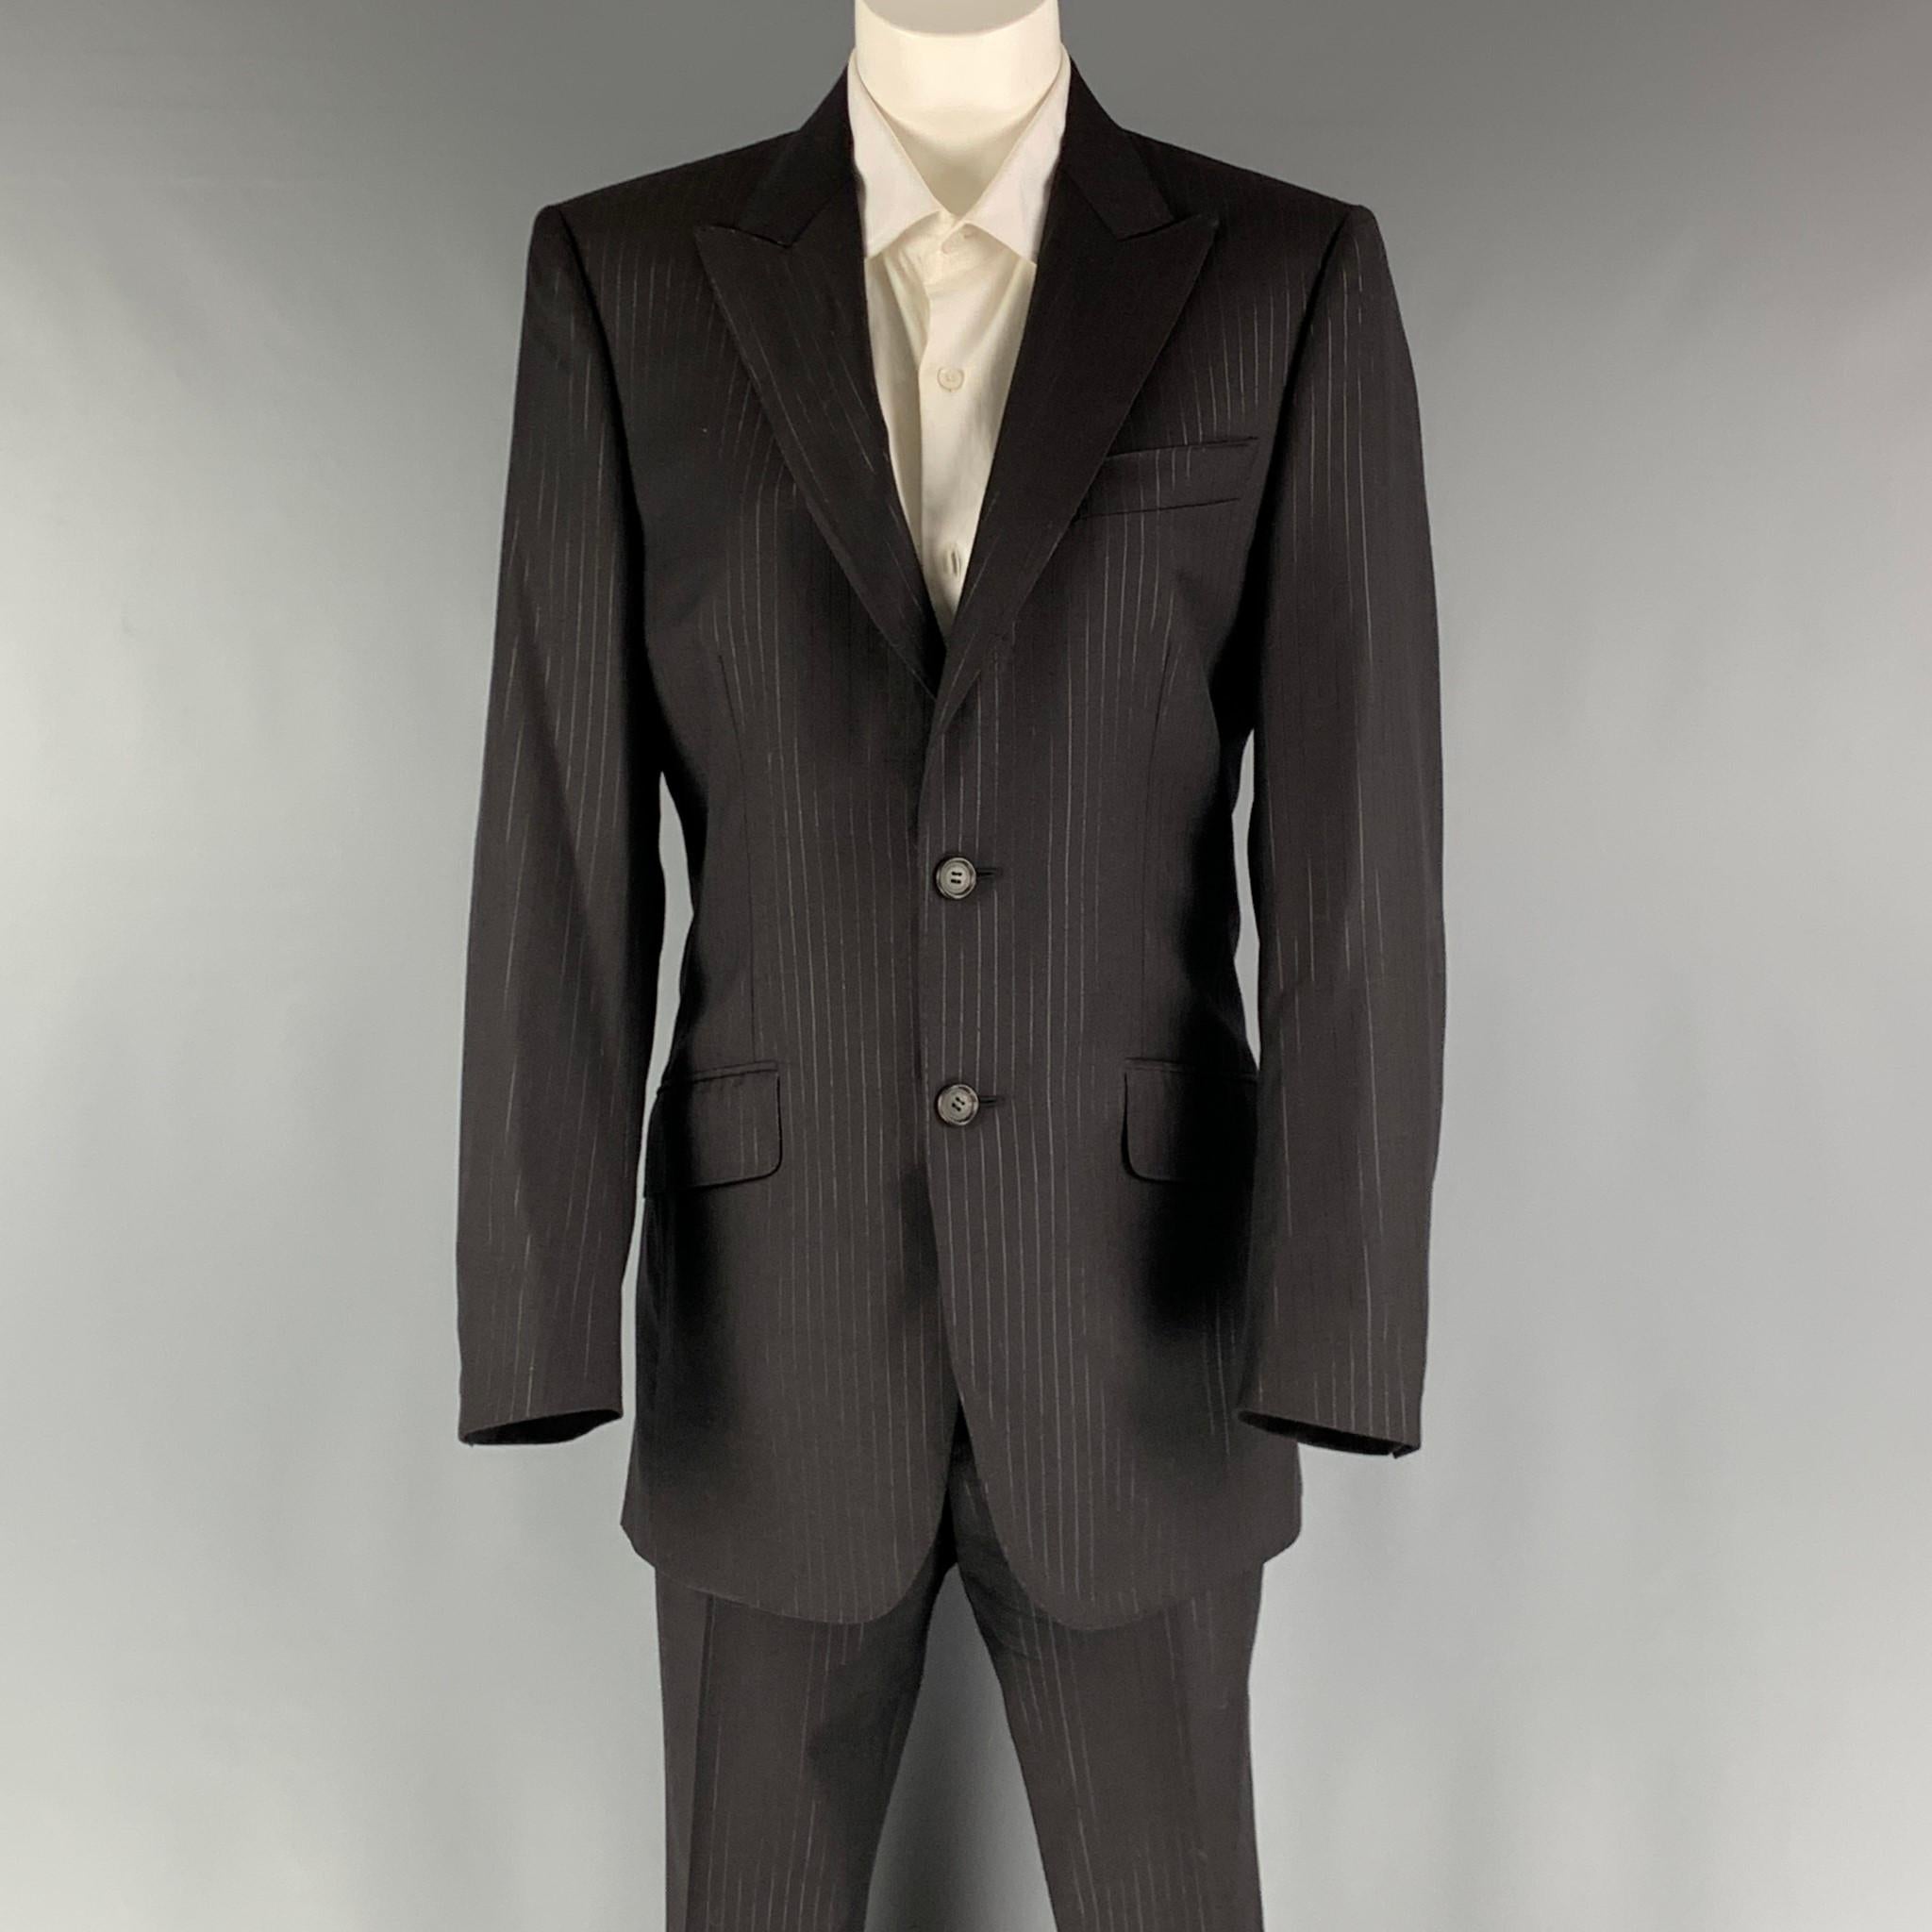 LANVIN suit comes in a black striped wool woven material with no lining and includes a single breasted, double button sport coat with a peak lapel and matching pleated front trousers. Made in Italy.

Excellent Pre-Owned Condition.
Marked: